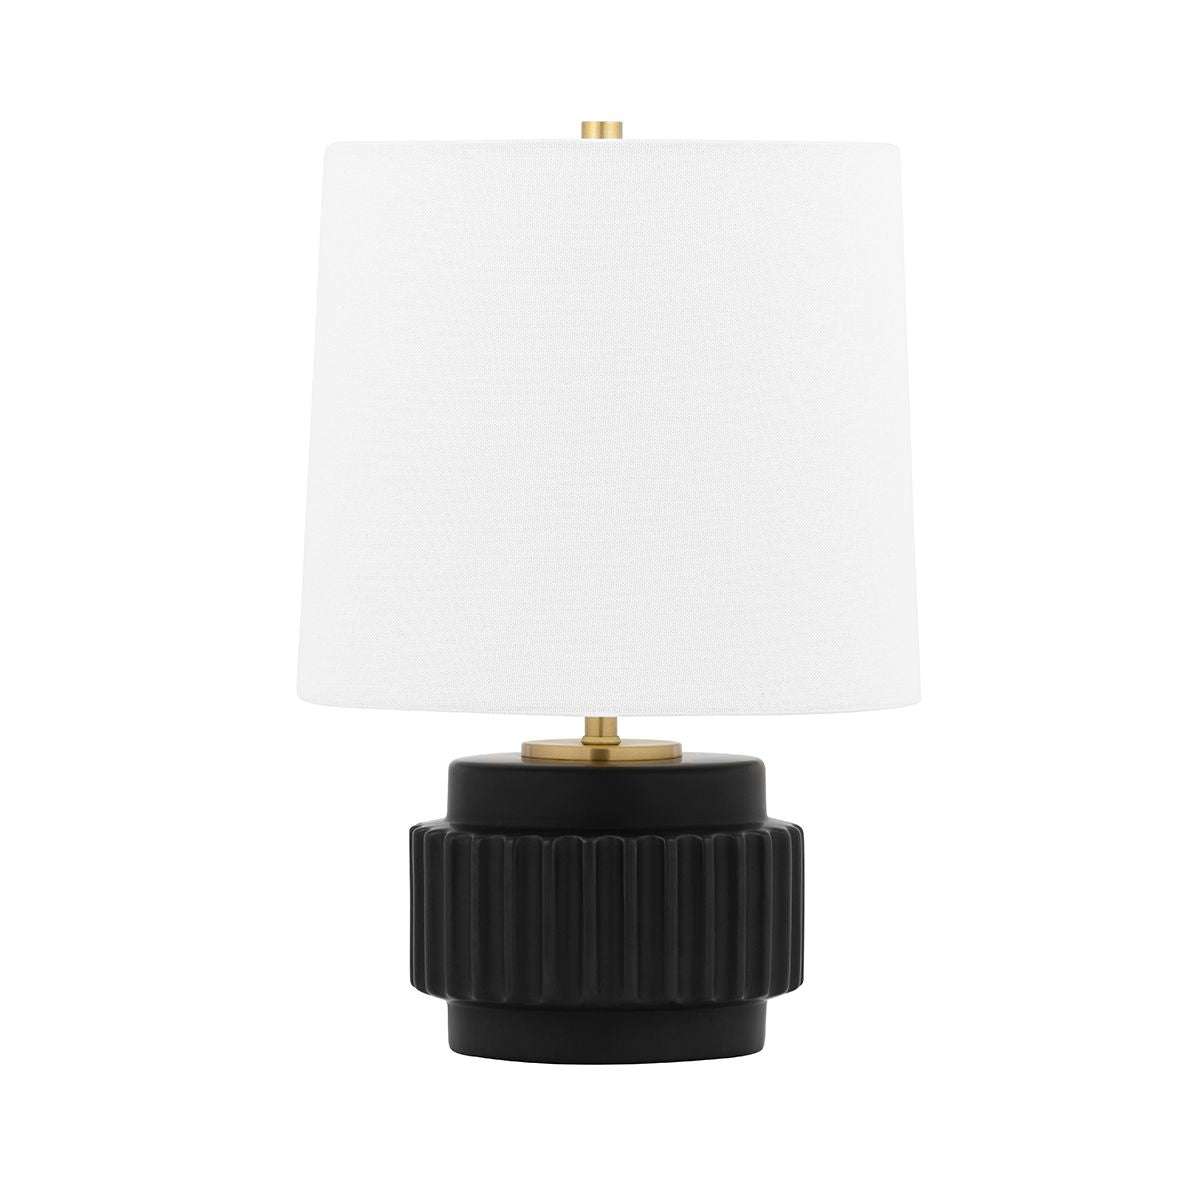 Kalani Table Lamp with Brass Accents - Bees Lighting